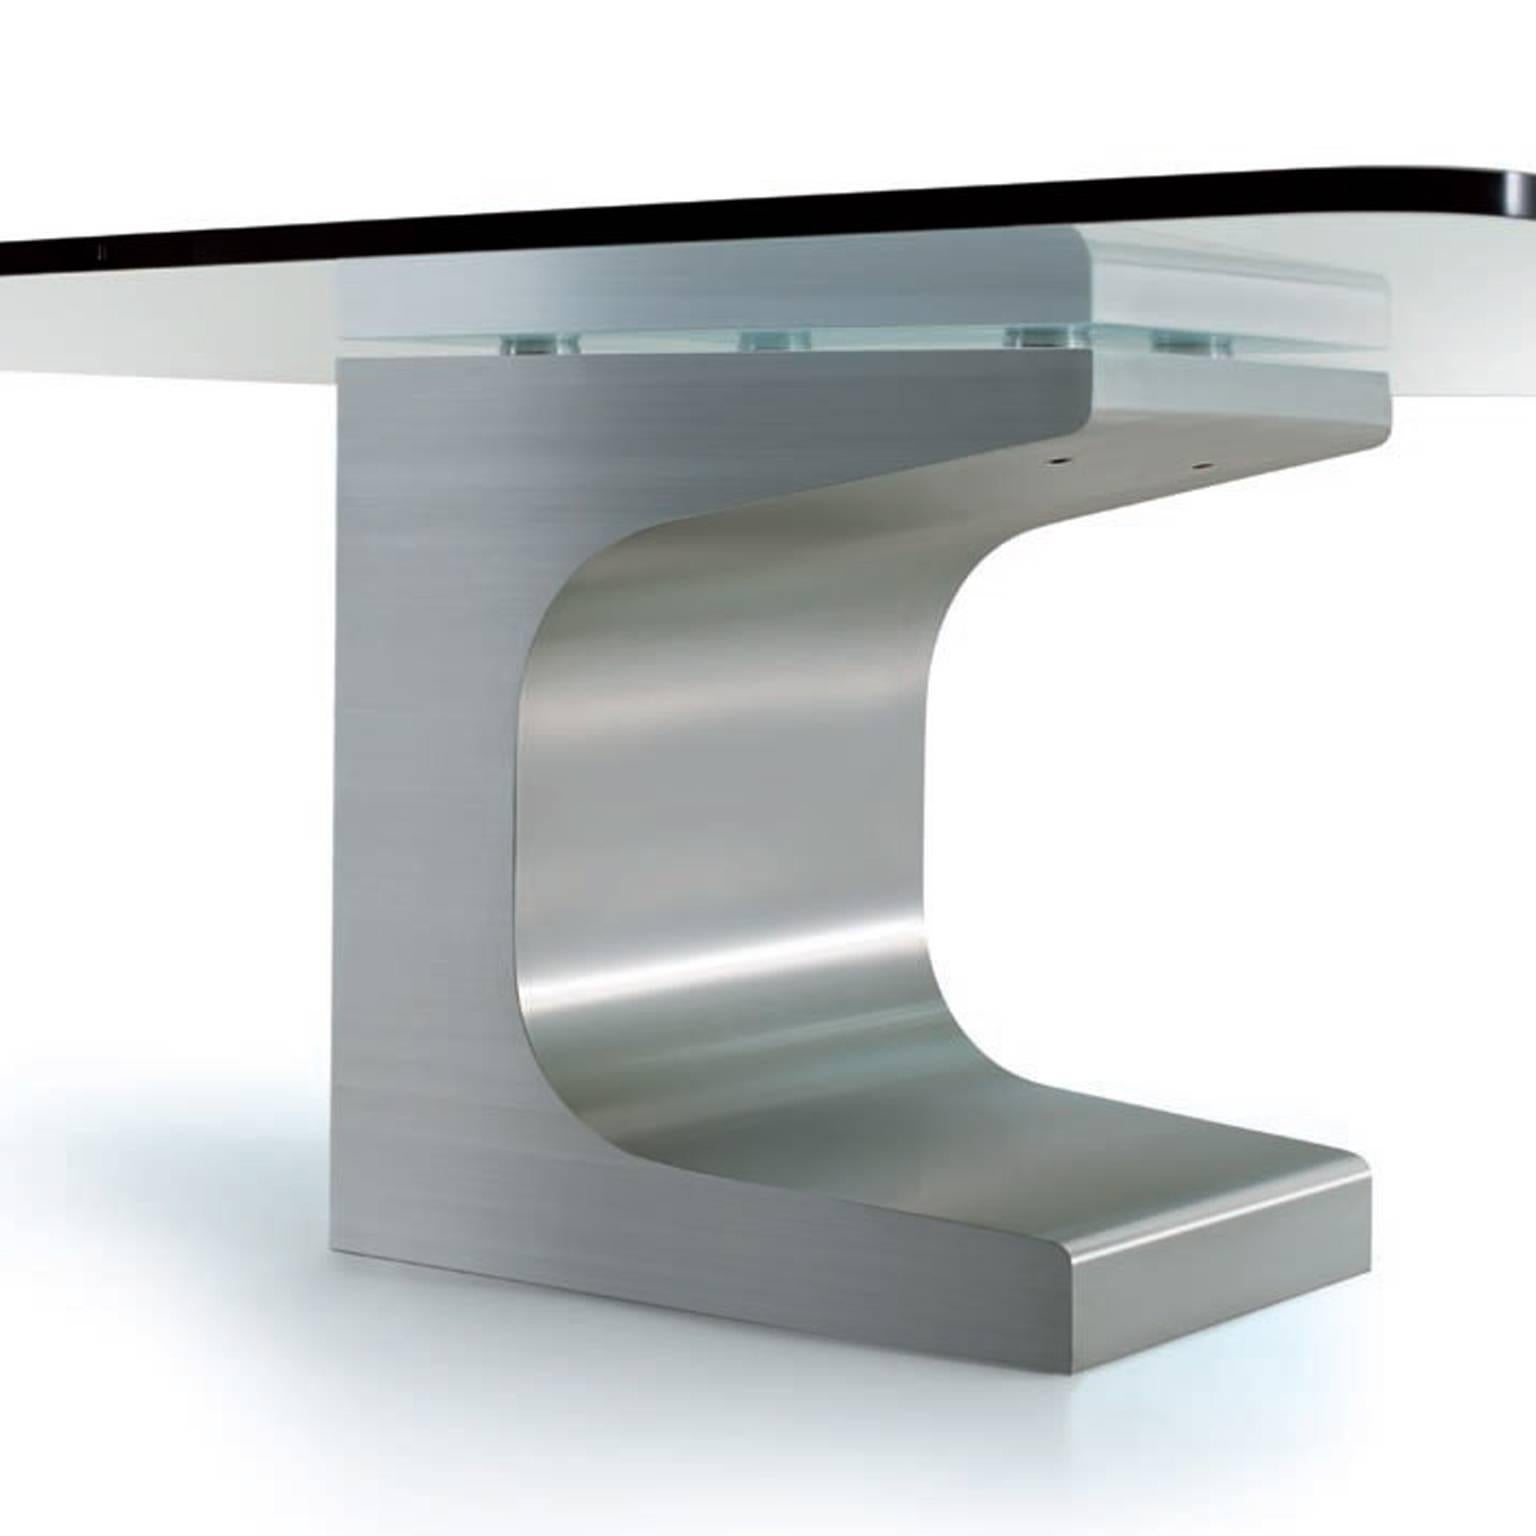 Table Niemeyer 1985 with tempered glass tabletop and a single sculptural leg made in wood covered with brushed stainless steel, with internal counter-weight plates. Designed by Oscar Niemeyer and produced by Estel in Italy.